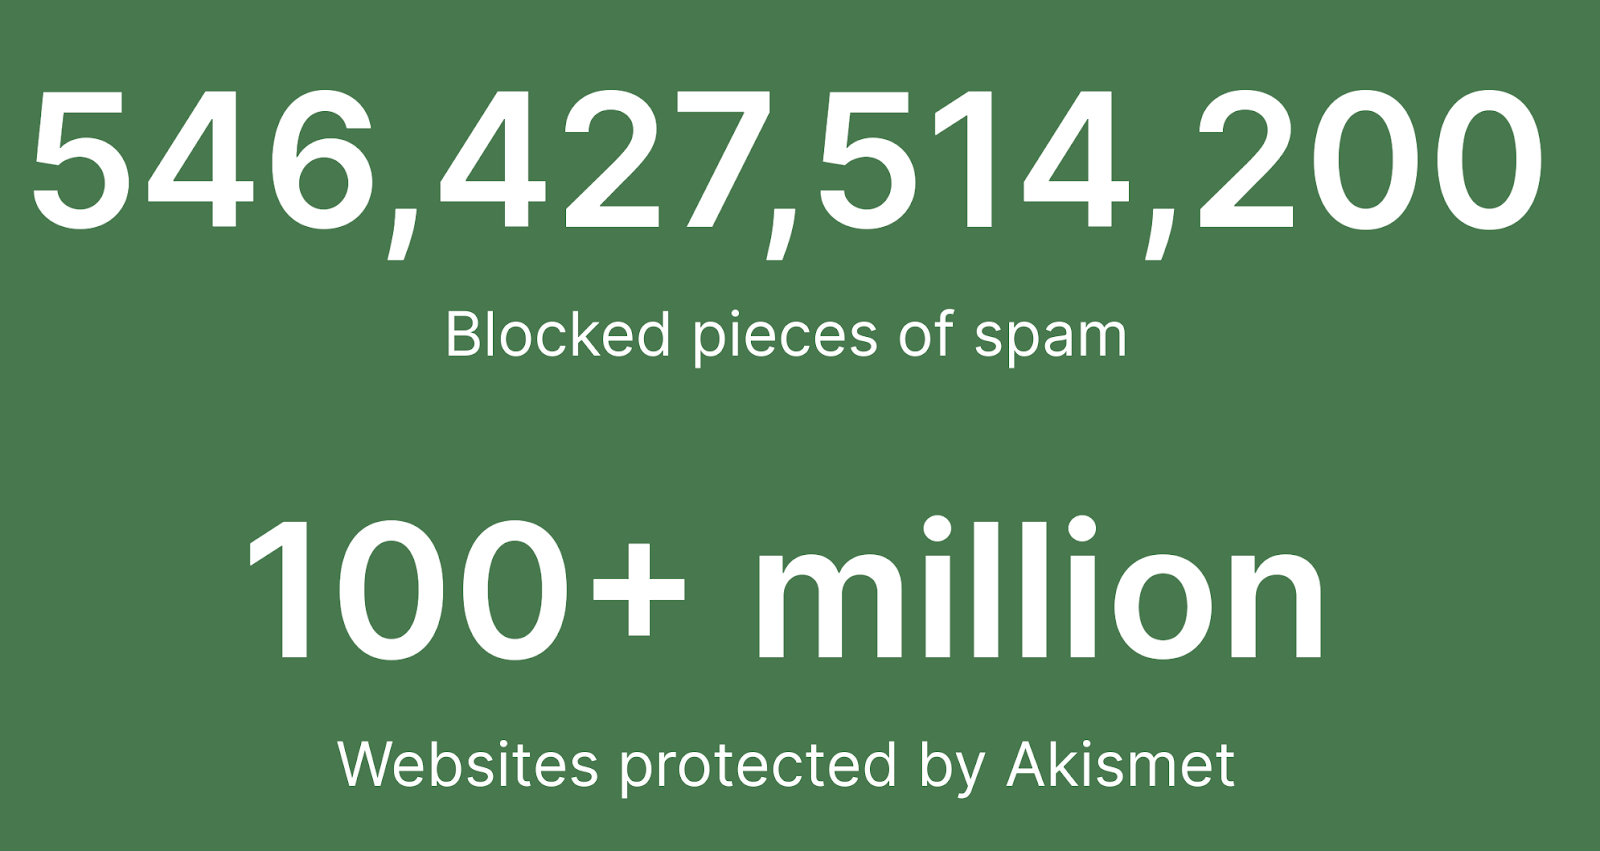 stats about spam blocked and websites protected by Akismet